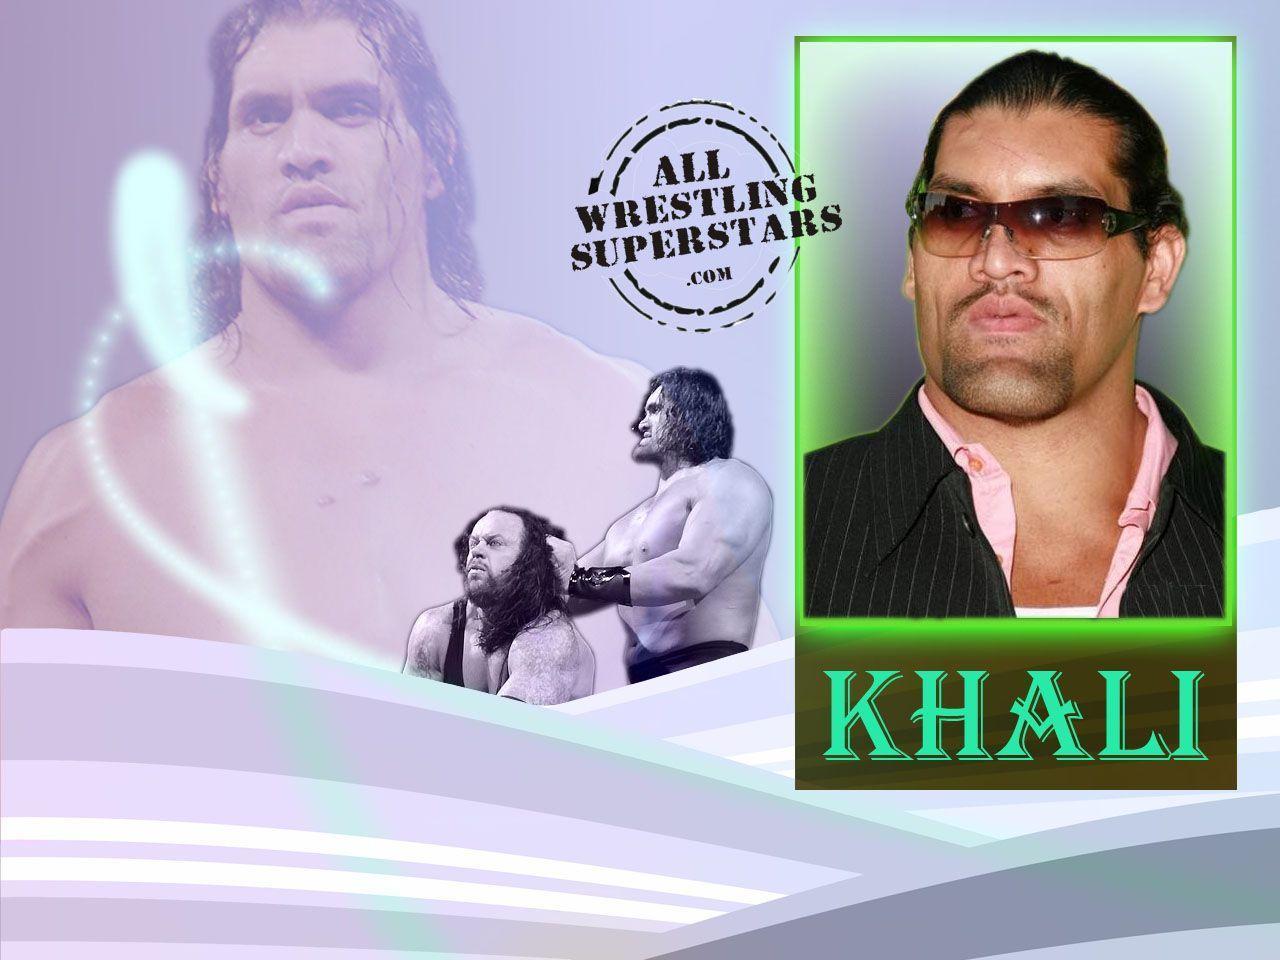 The Great Khali Wallpapers